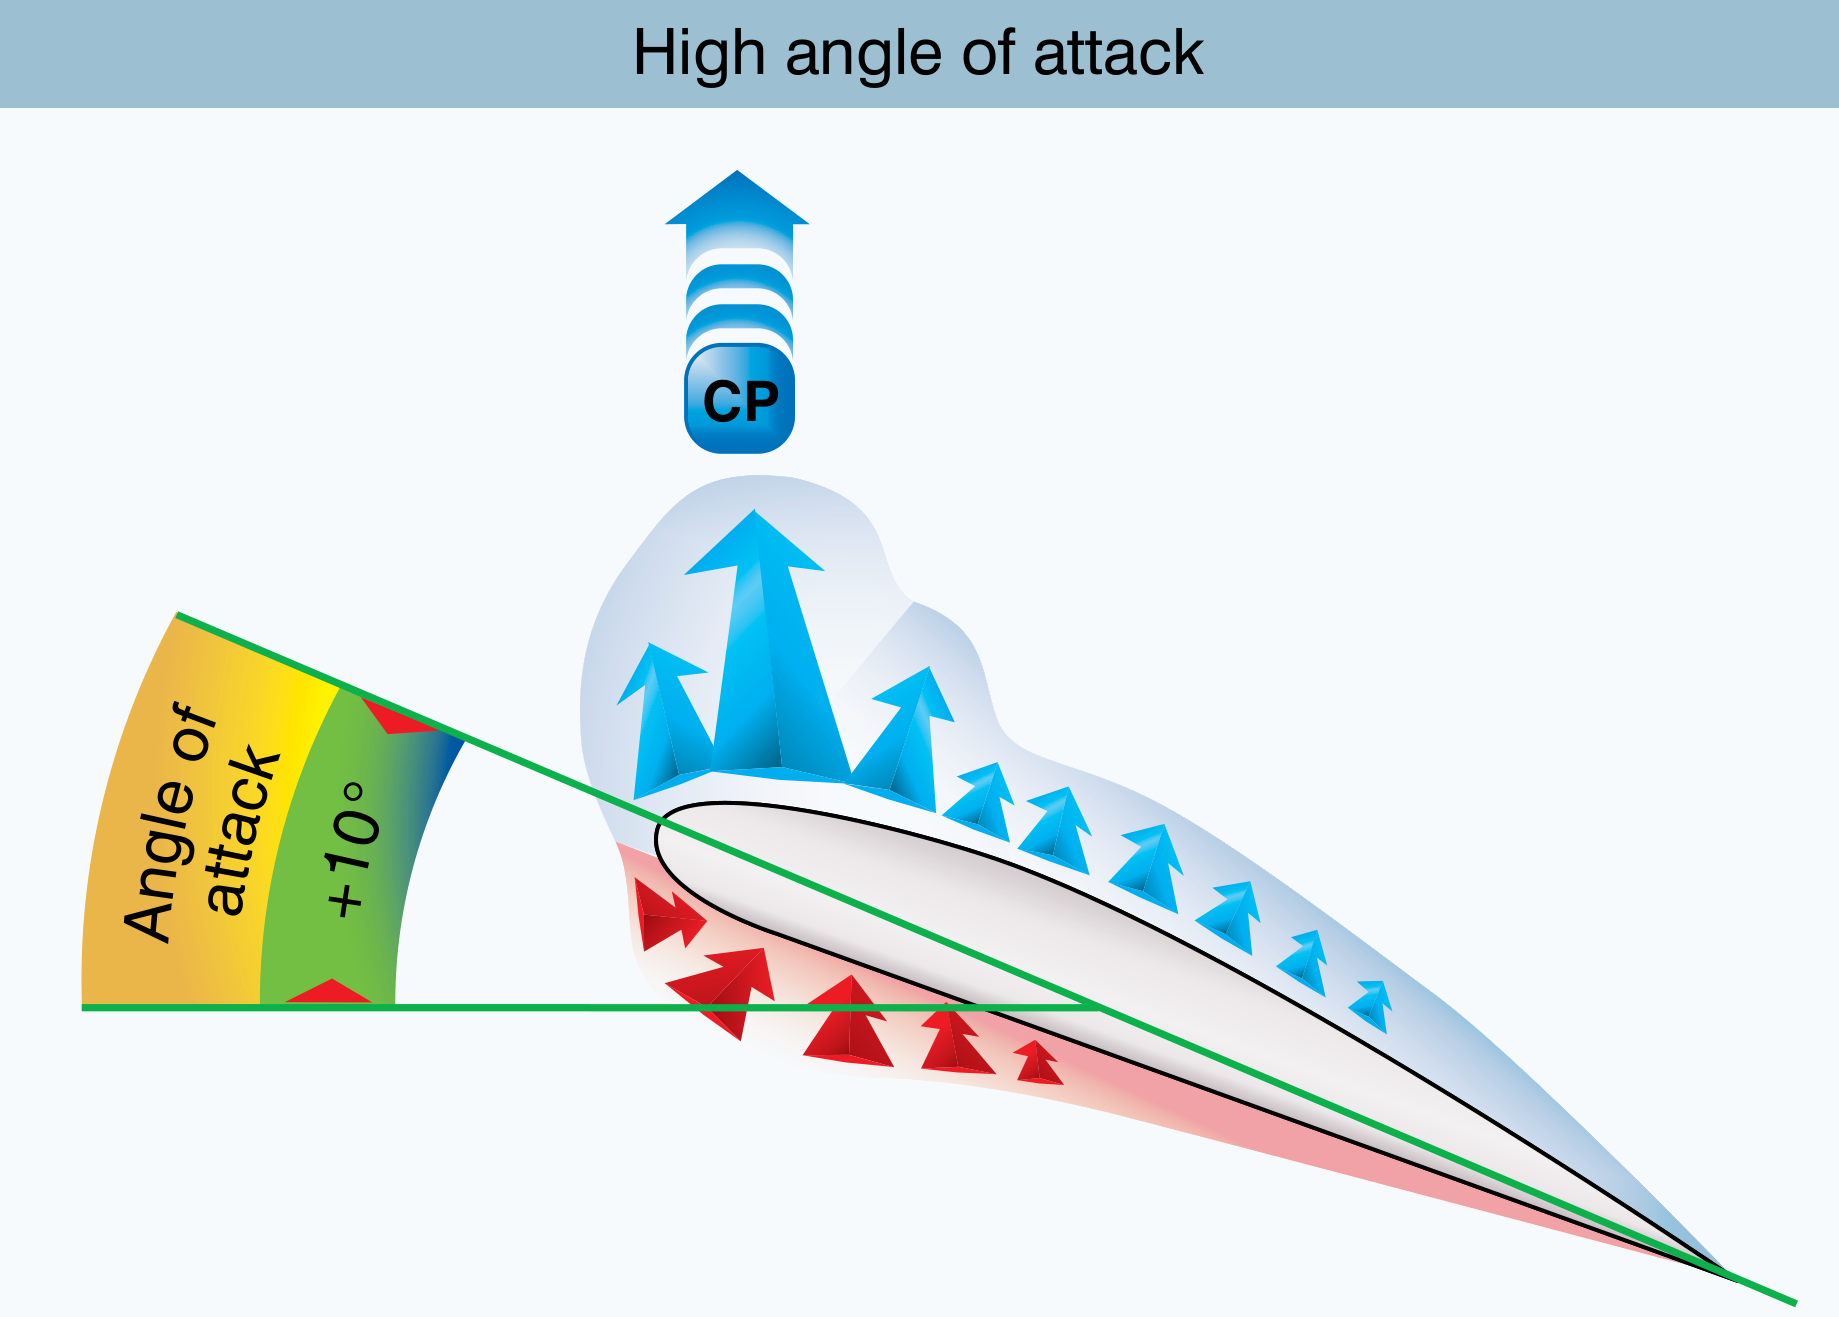 Airfoil pressure distribution at high angles of attack.